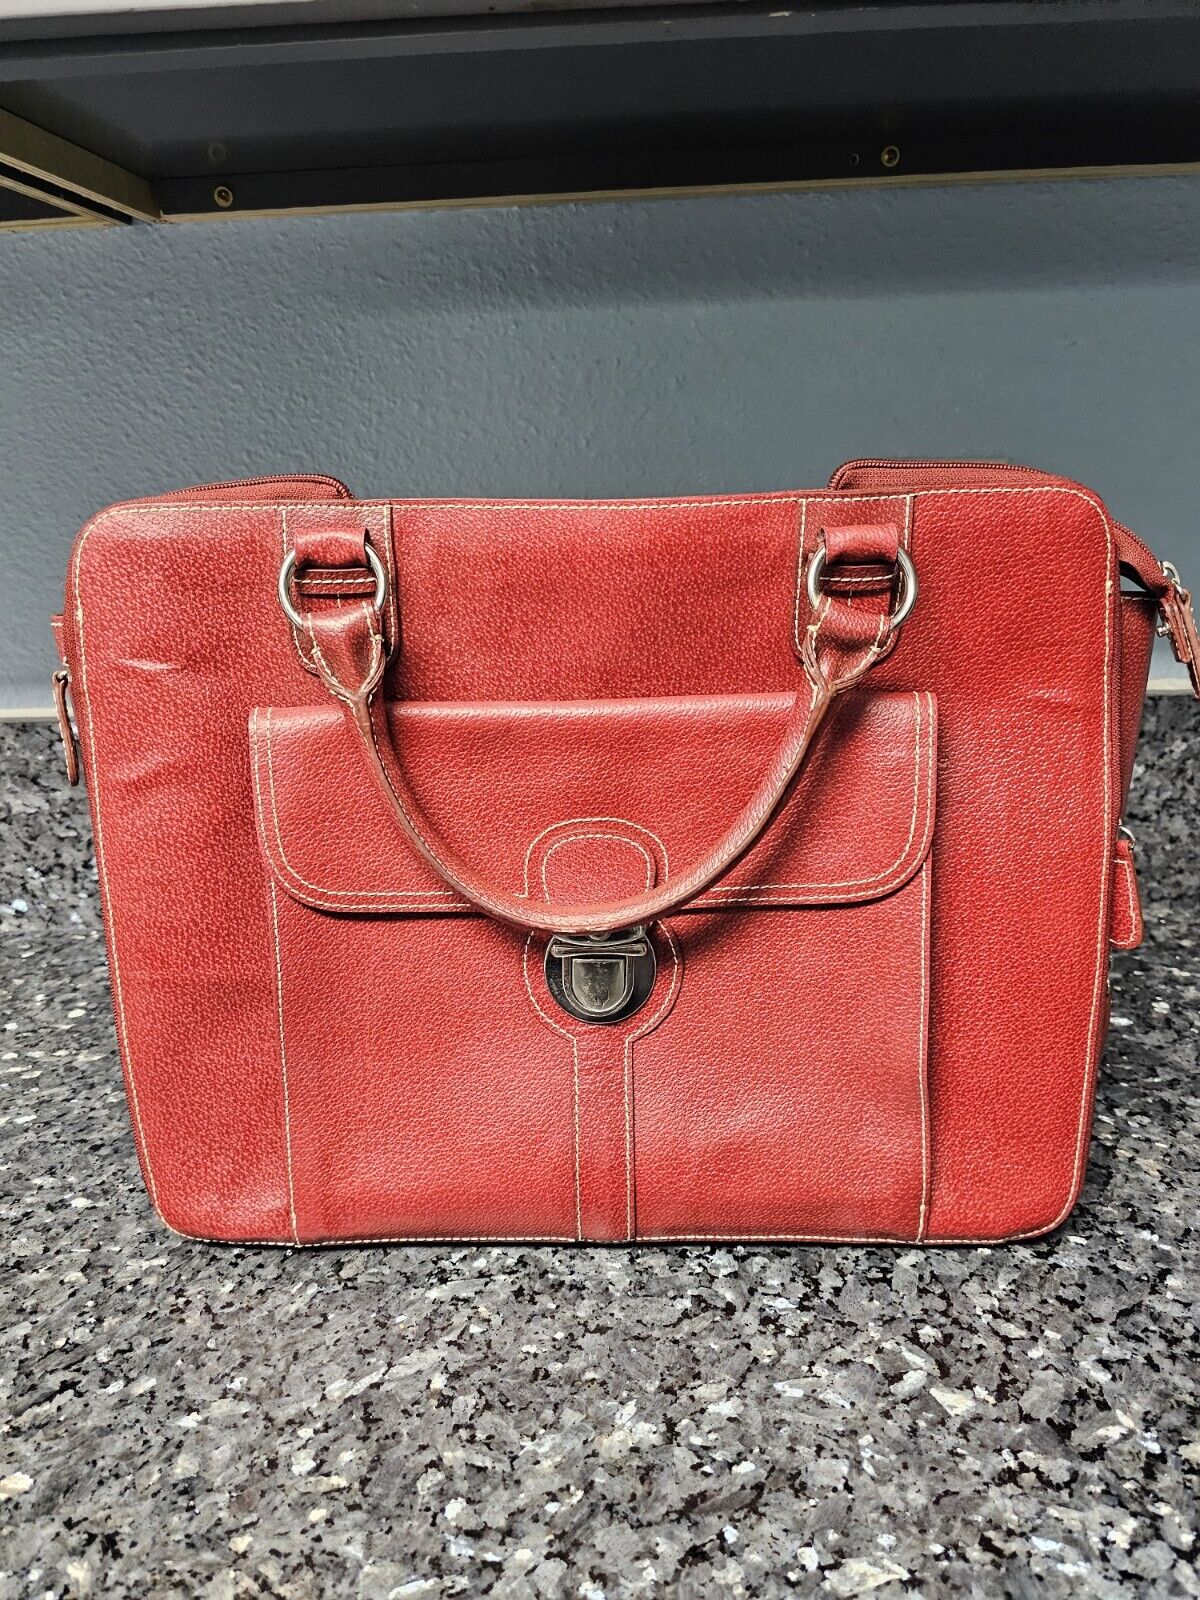 Franklin Covey Classic Genuine Leather Briefcase Organizer Red